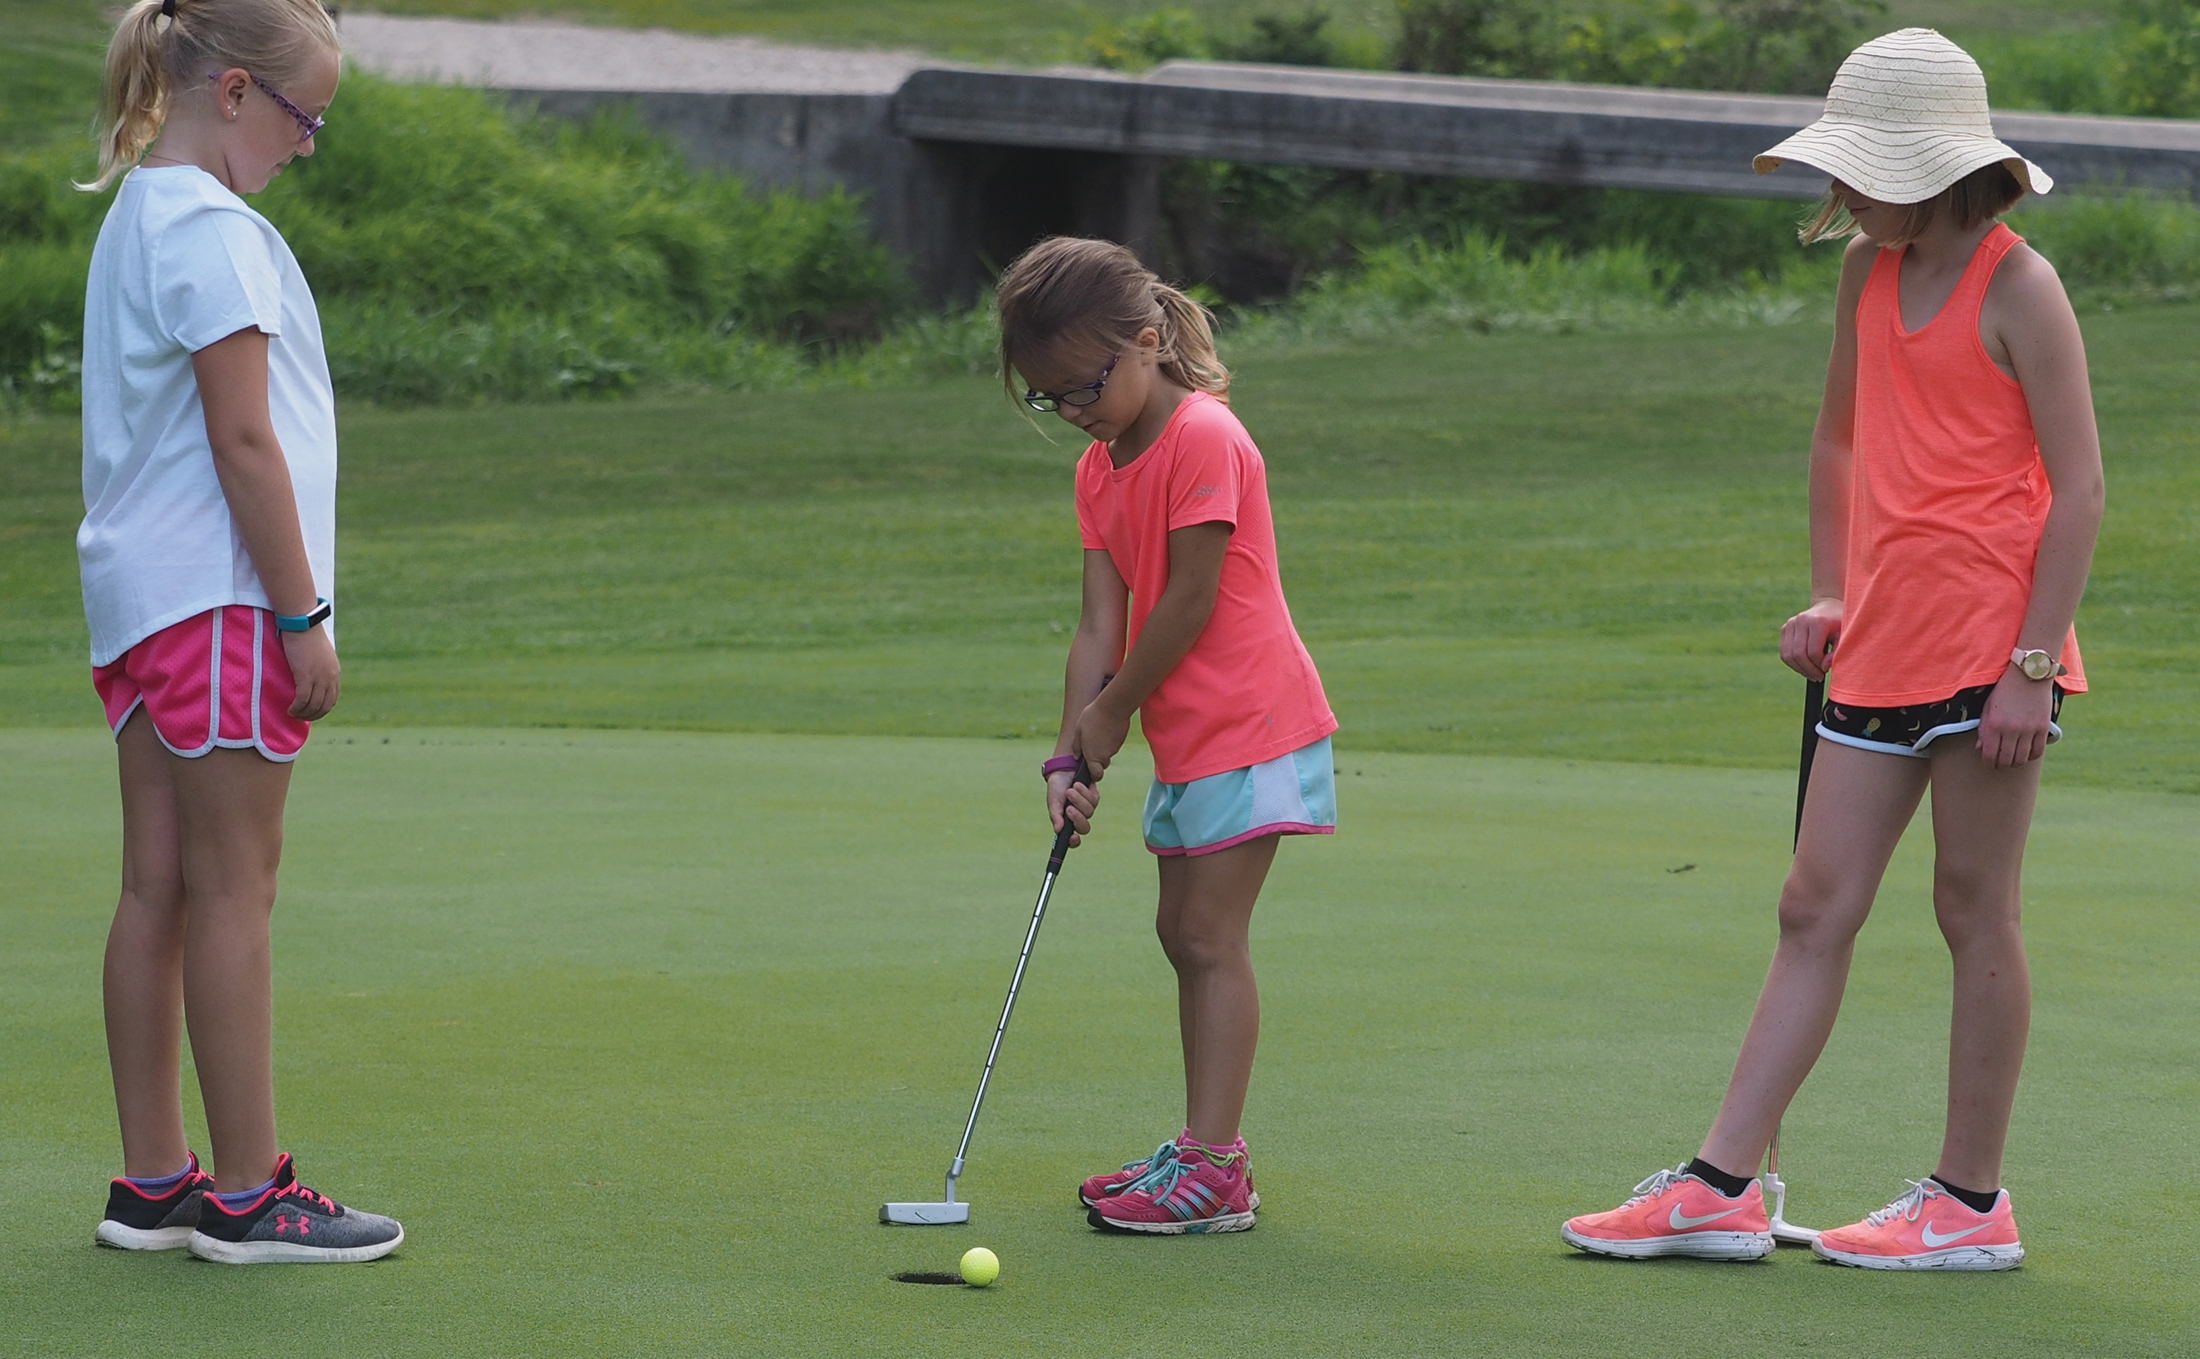 Kids learn patience, control at YMCA Golf Clinic